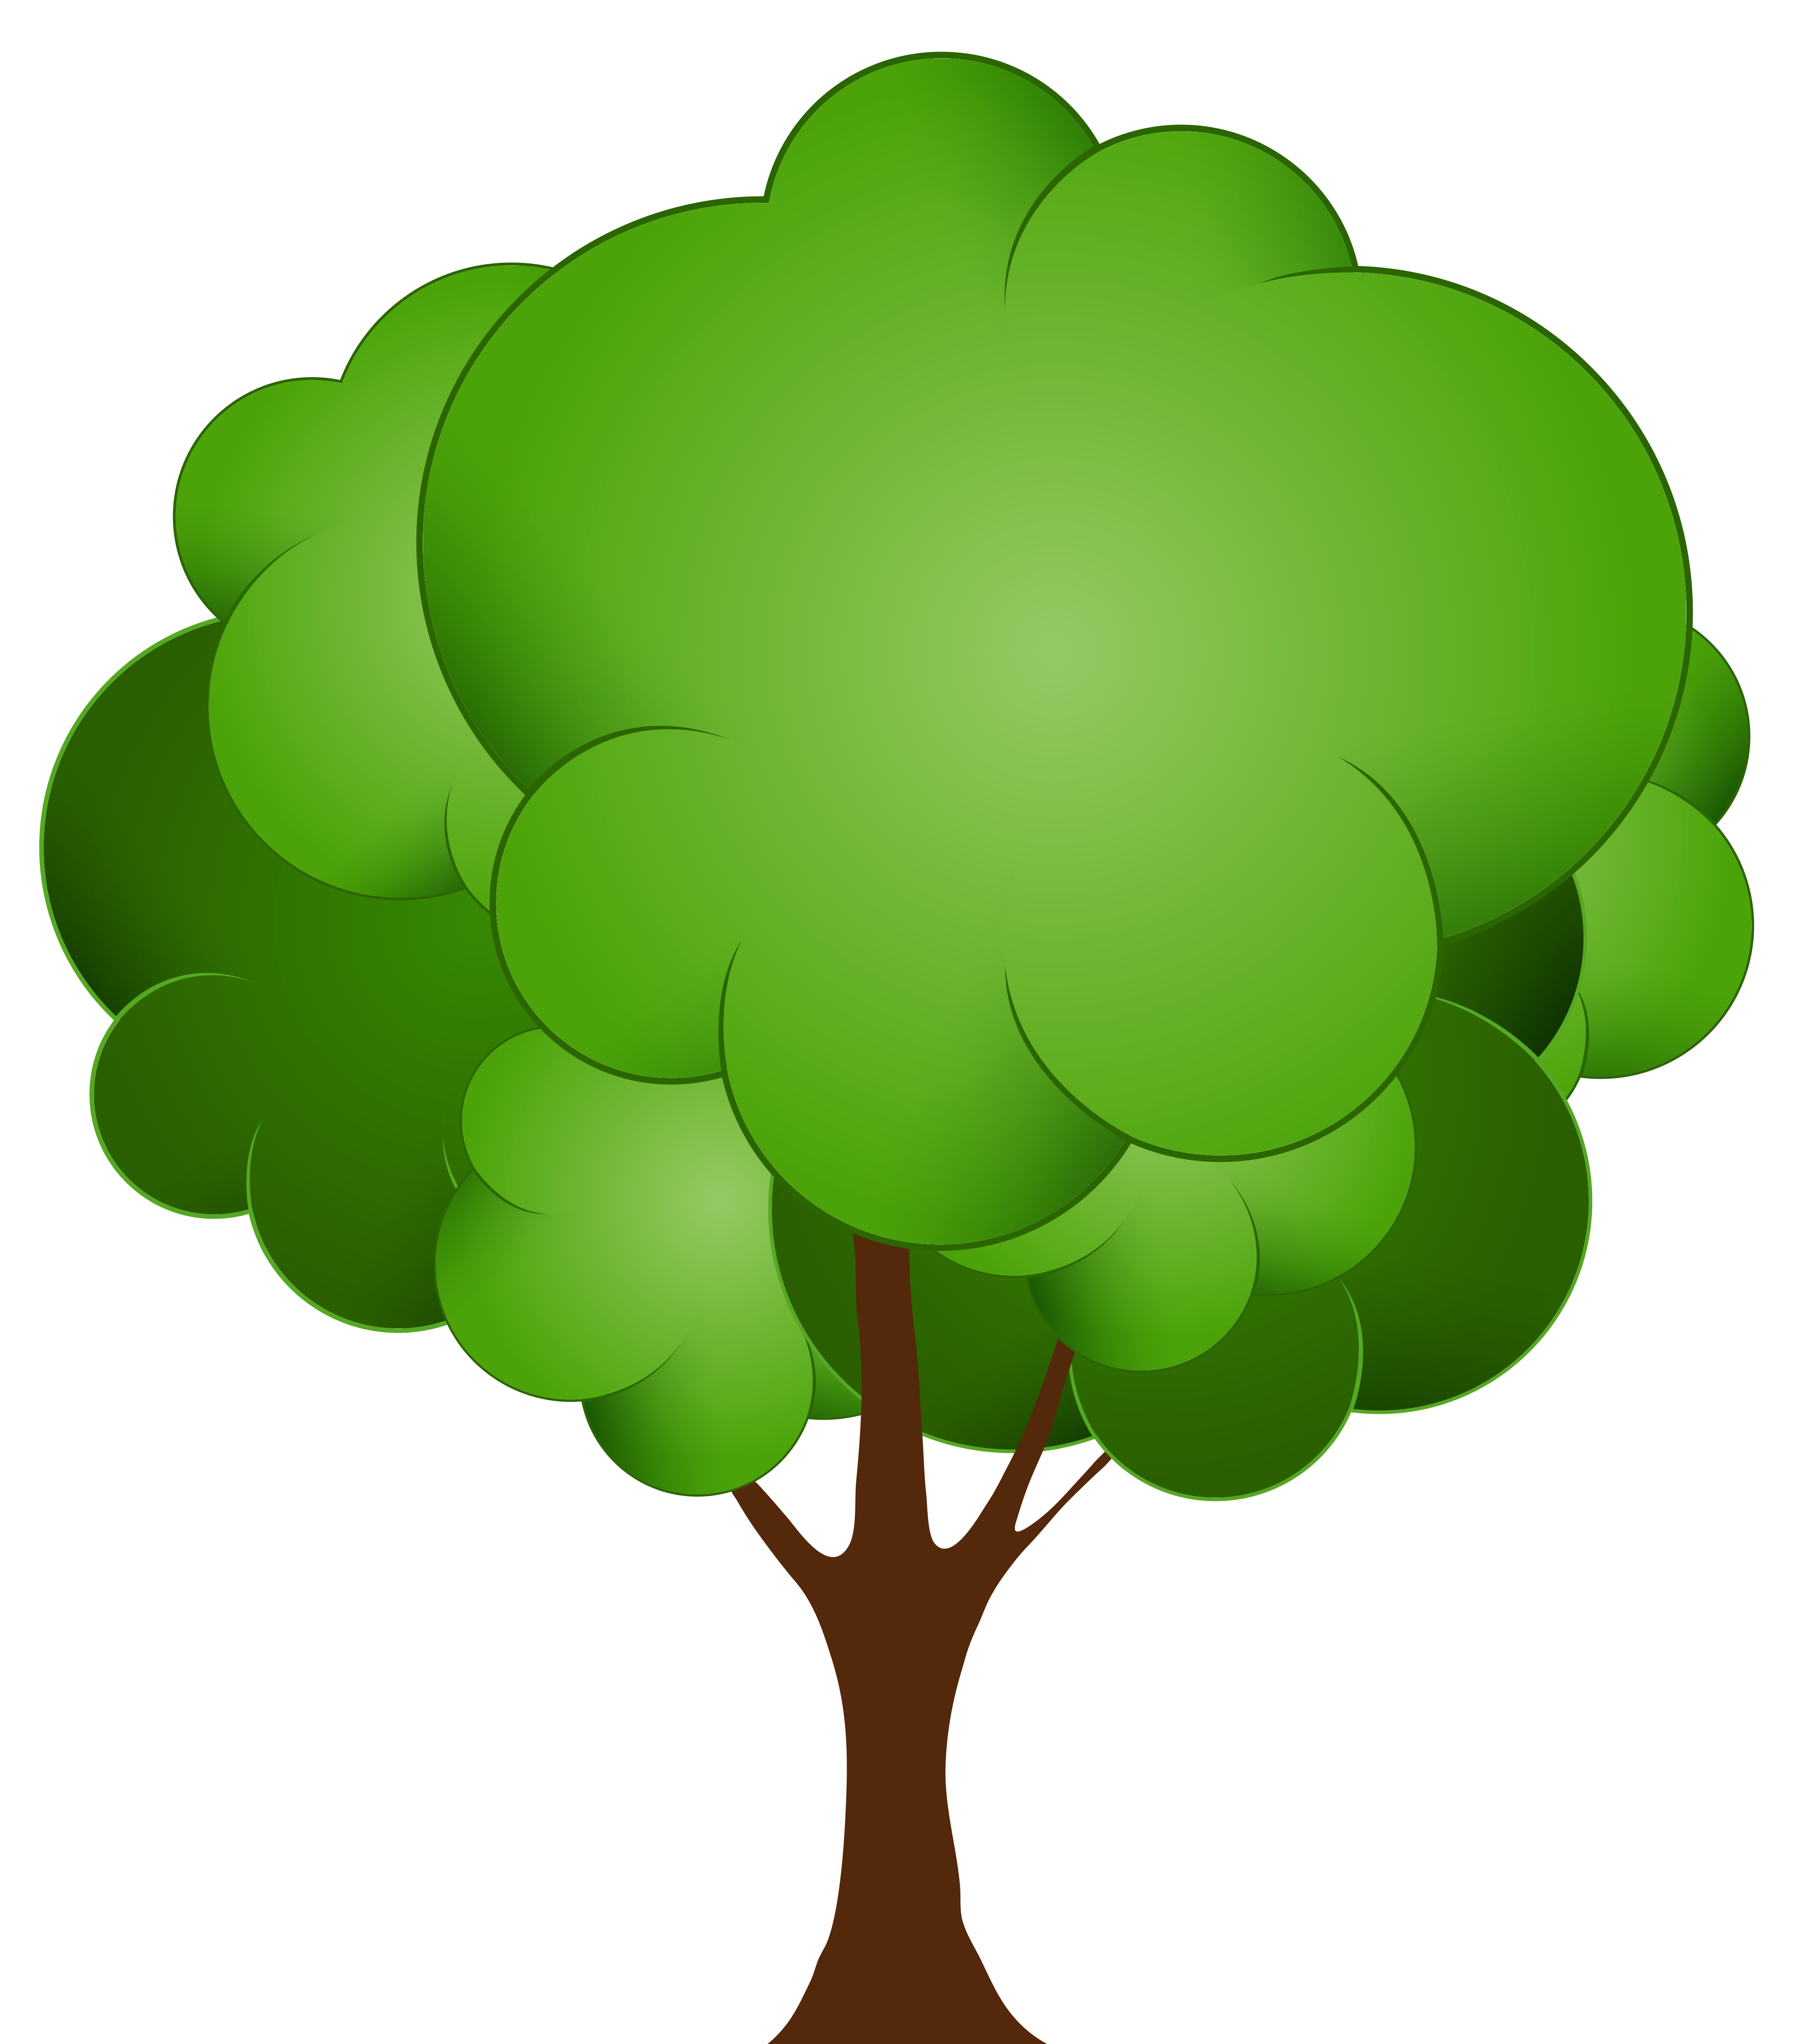 clipart images of a tree - photo #50